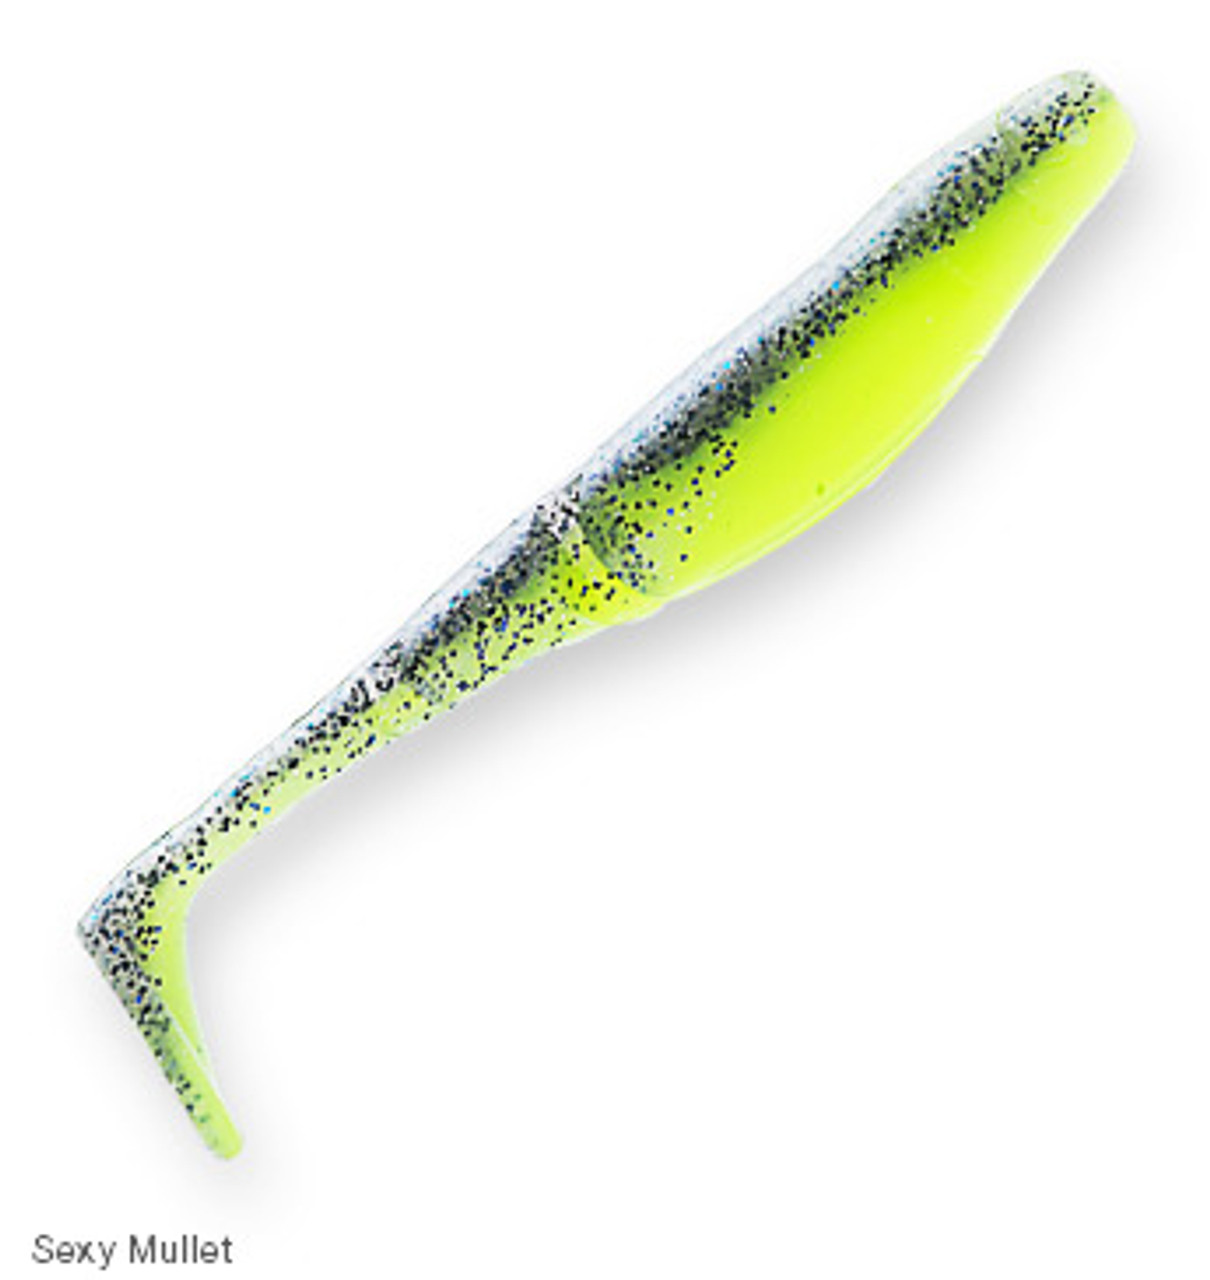 Z-Man Scented PaddlerZ- Sexy Mullet - OZTackle Fishing Gear